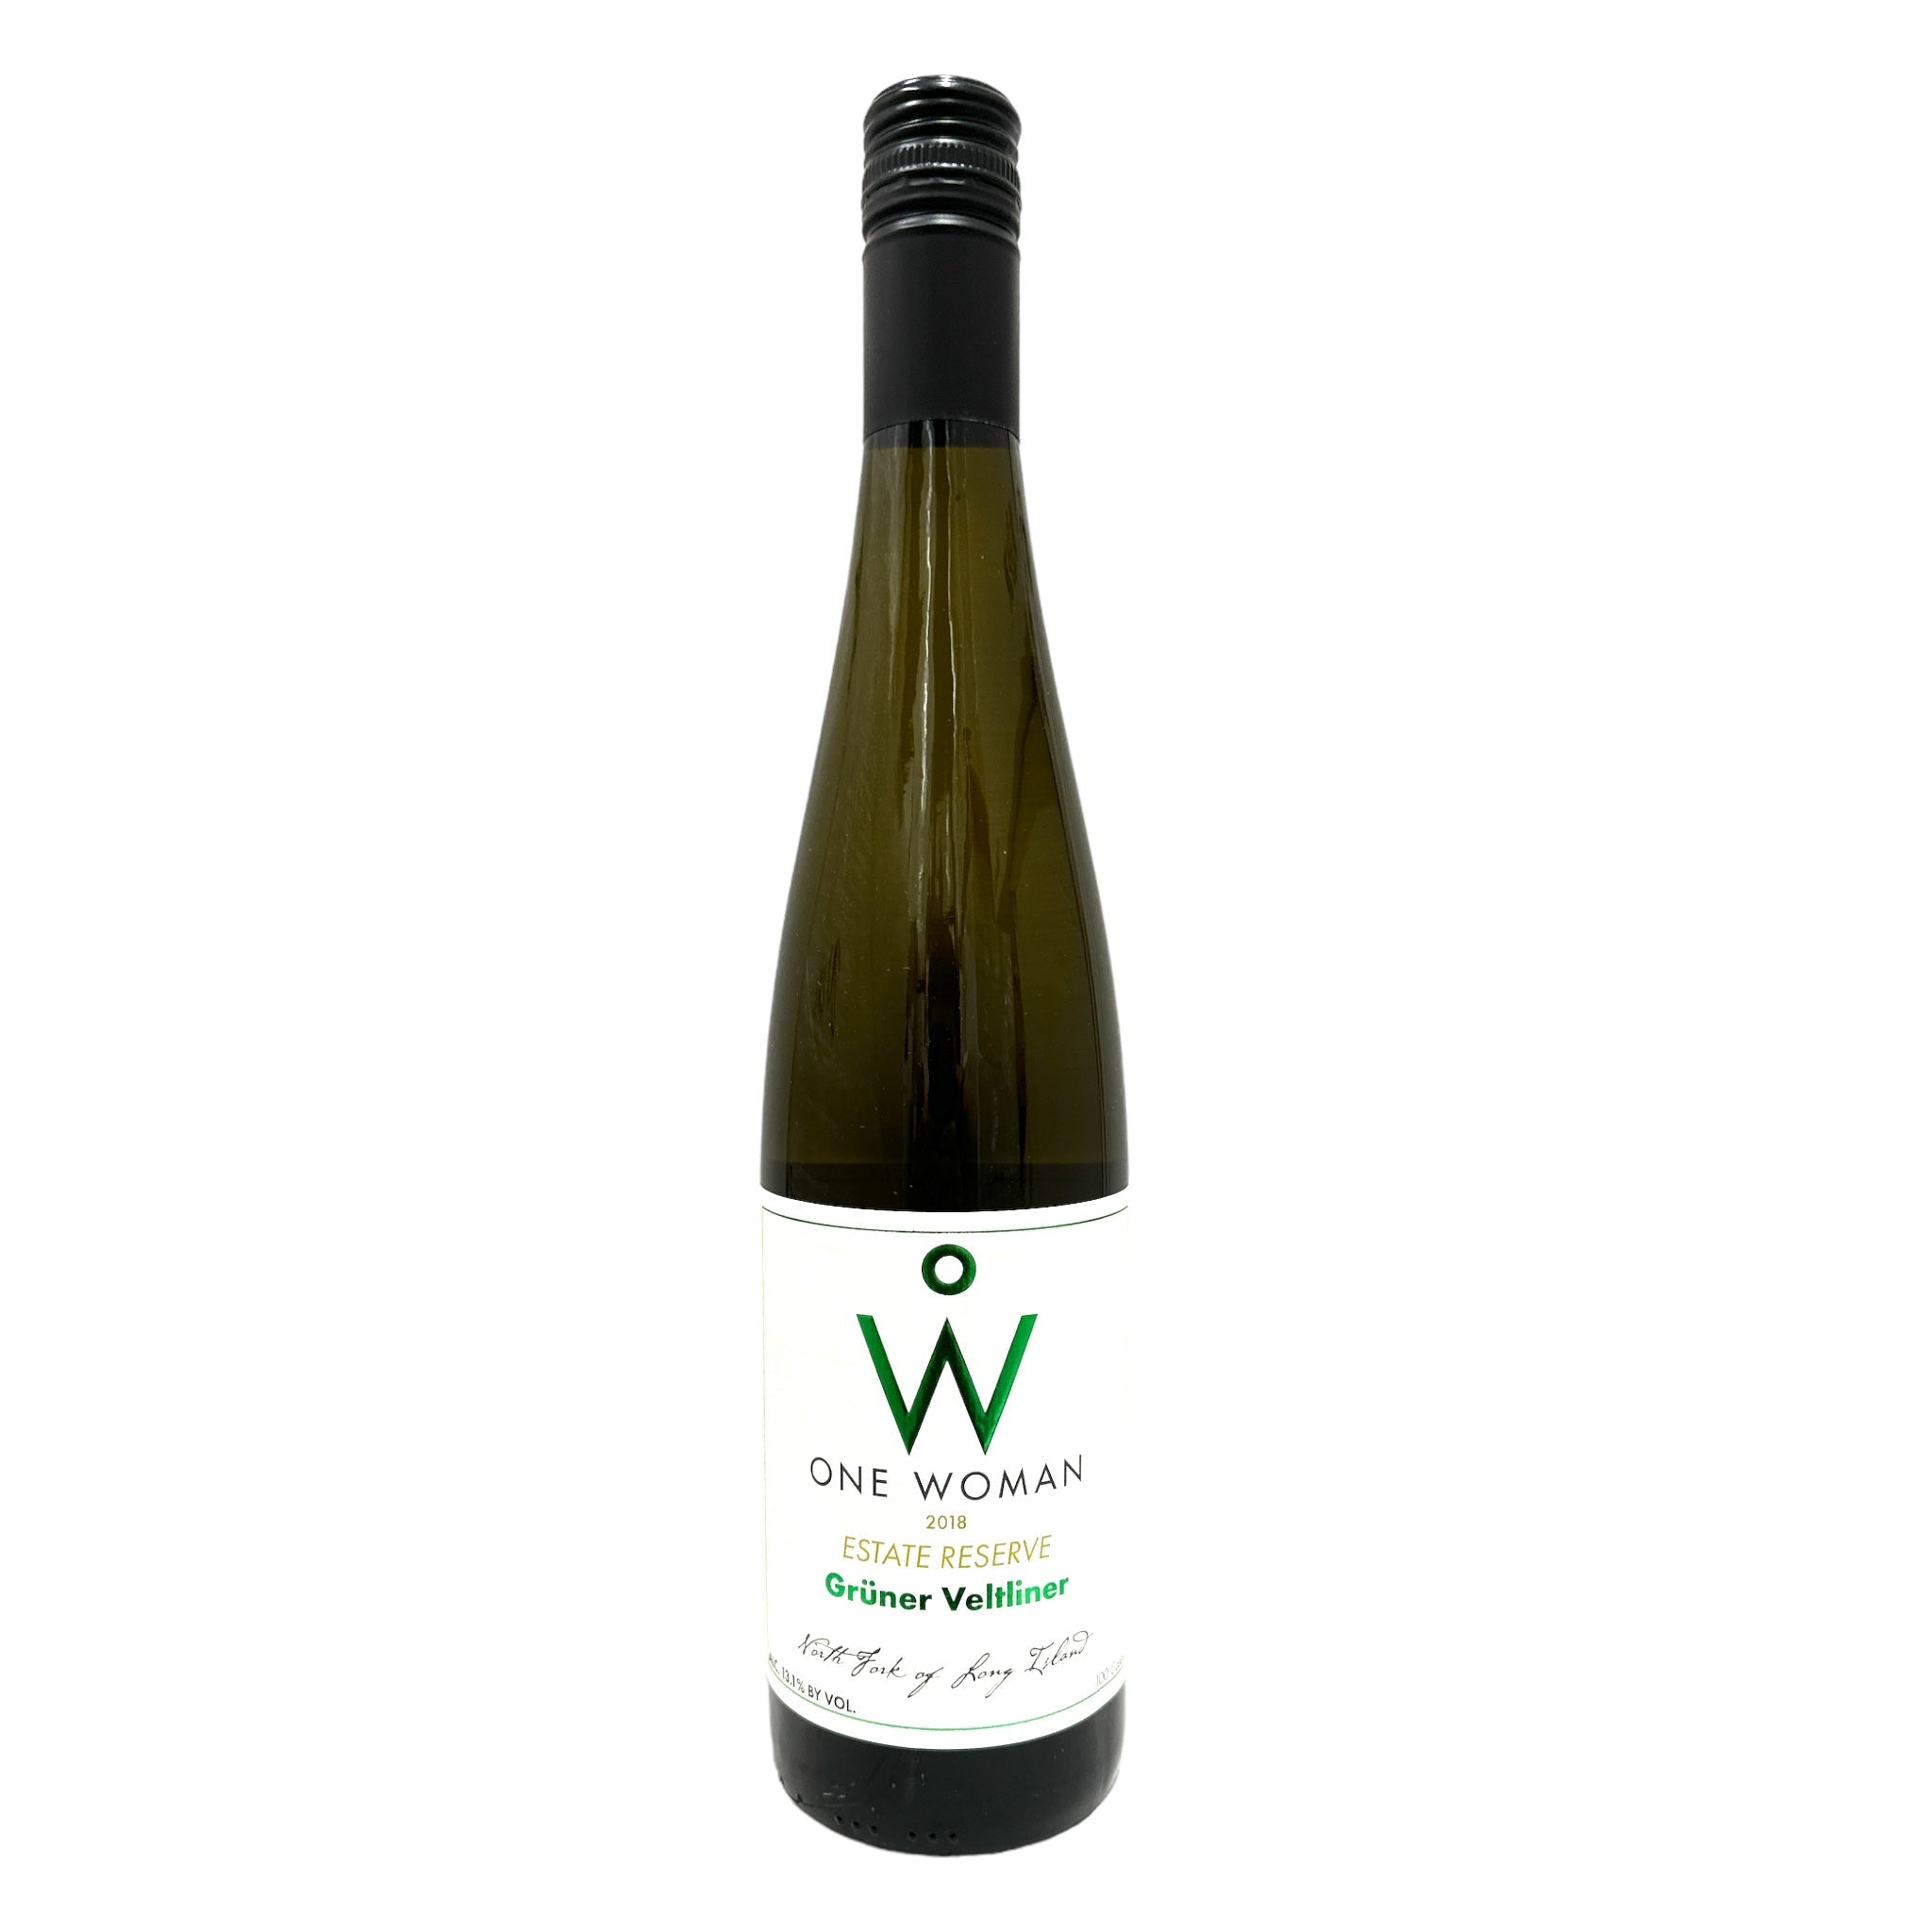 2018 One Woman Estate Reserve Gruner Veltliner - One Woman Winery